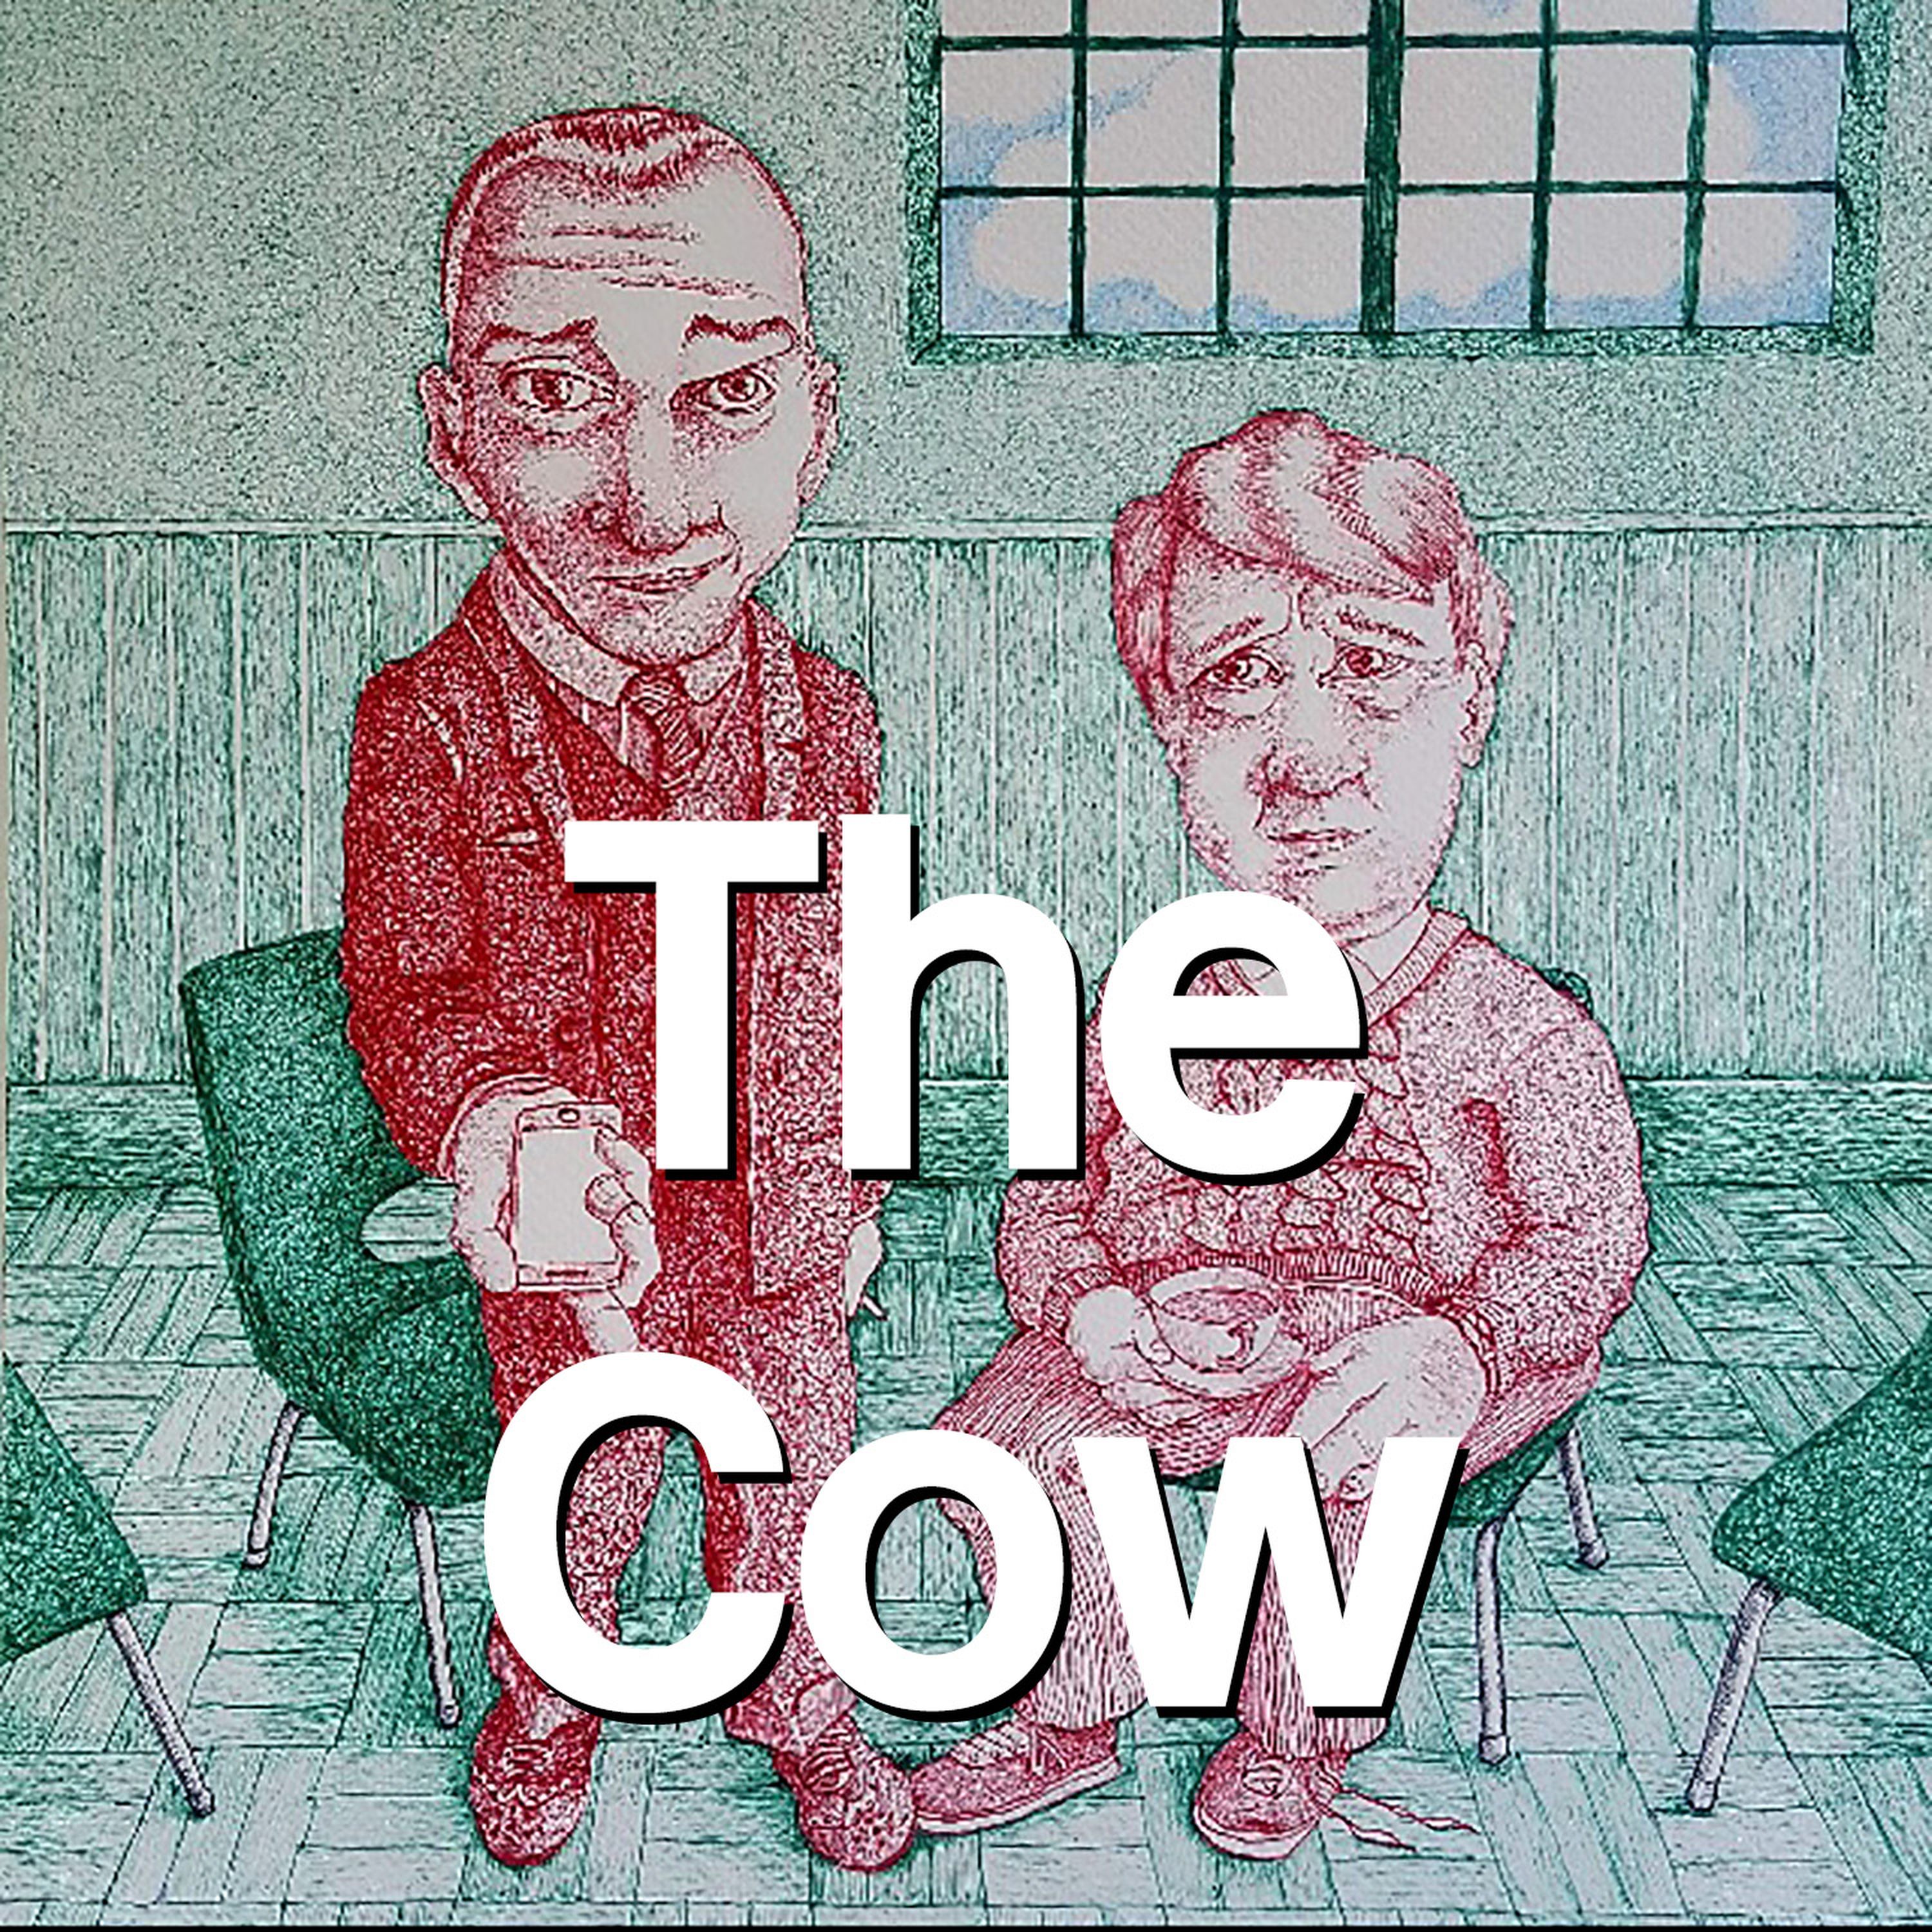 05: The Cow